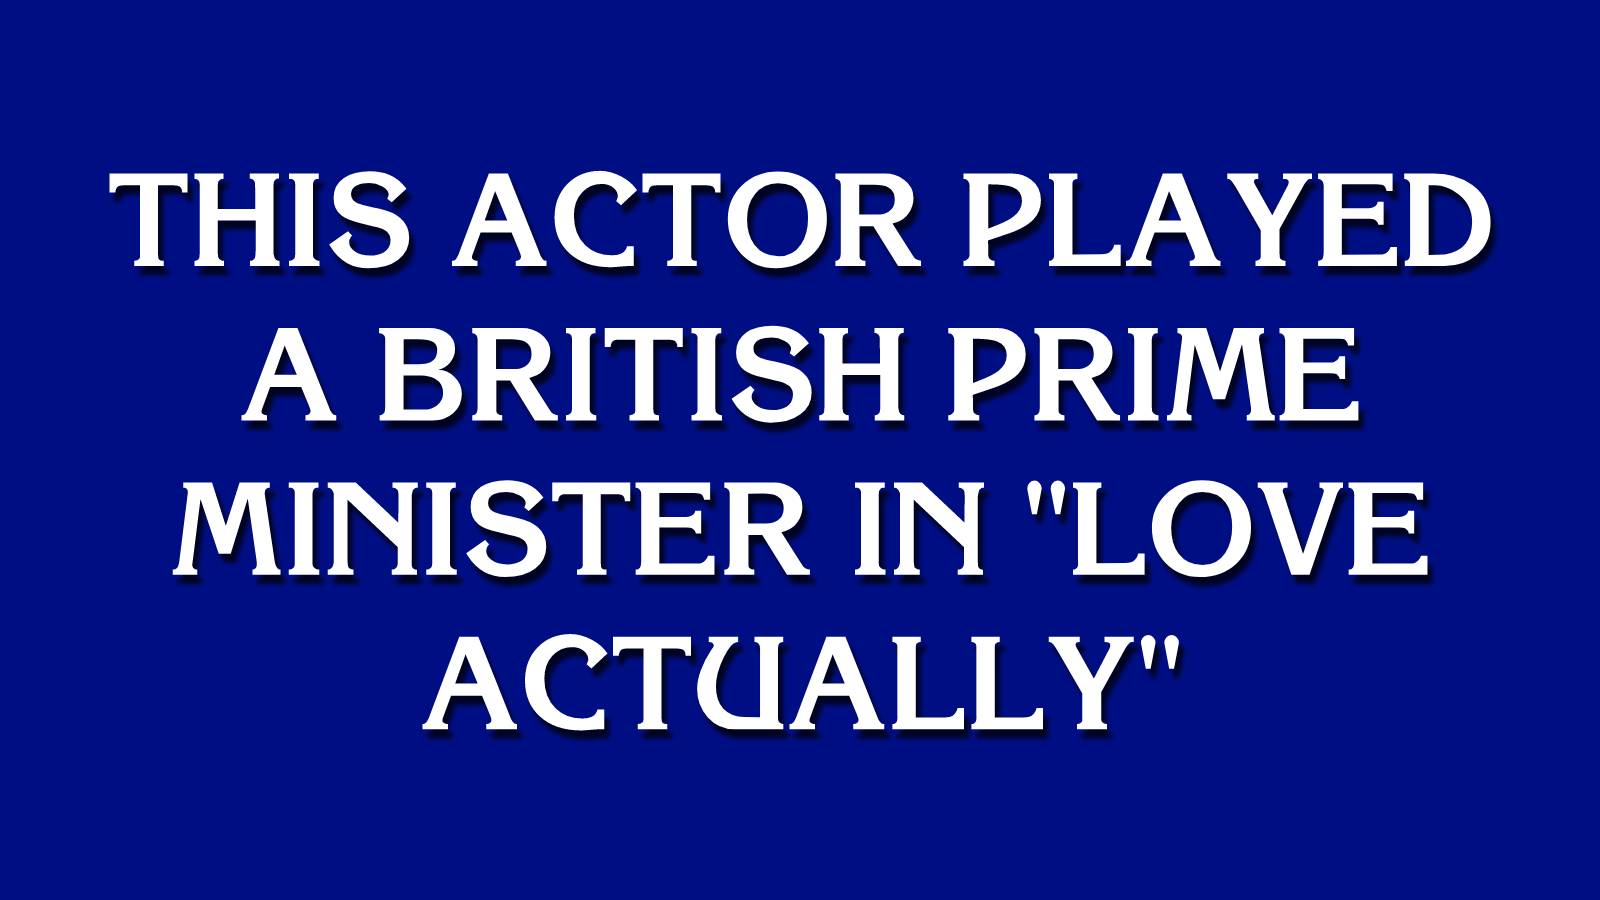 Do You Have the Smarts to Win This Game of “Jeopardy!”? Template Jeopardy 71